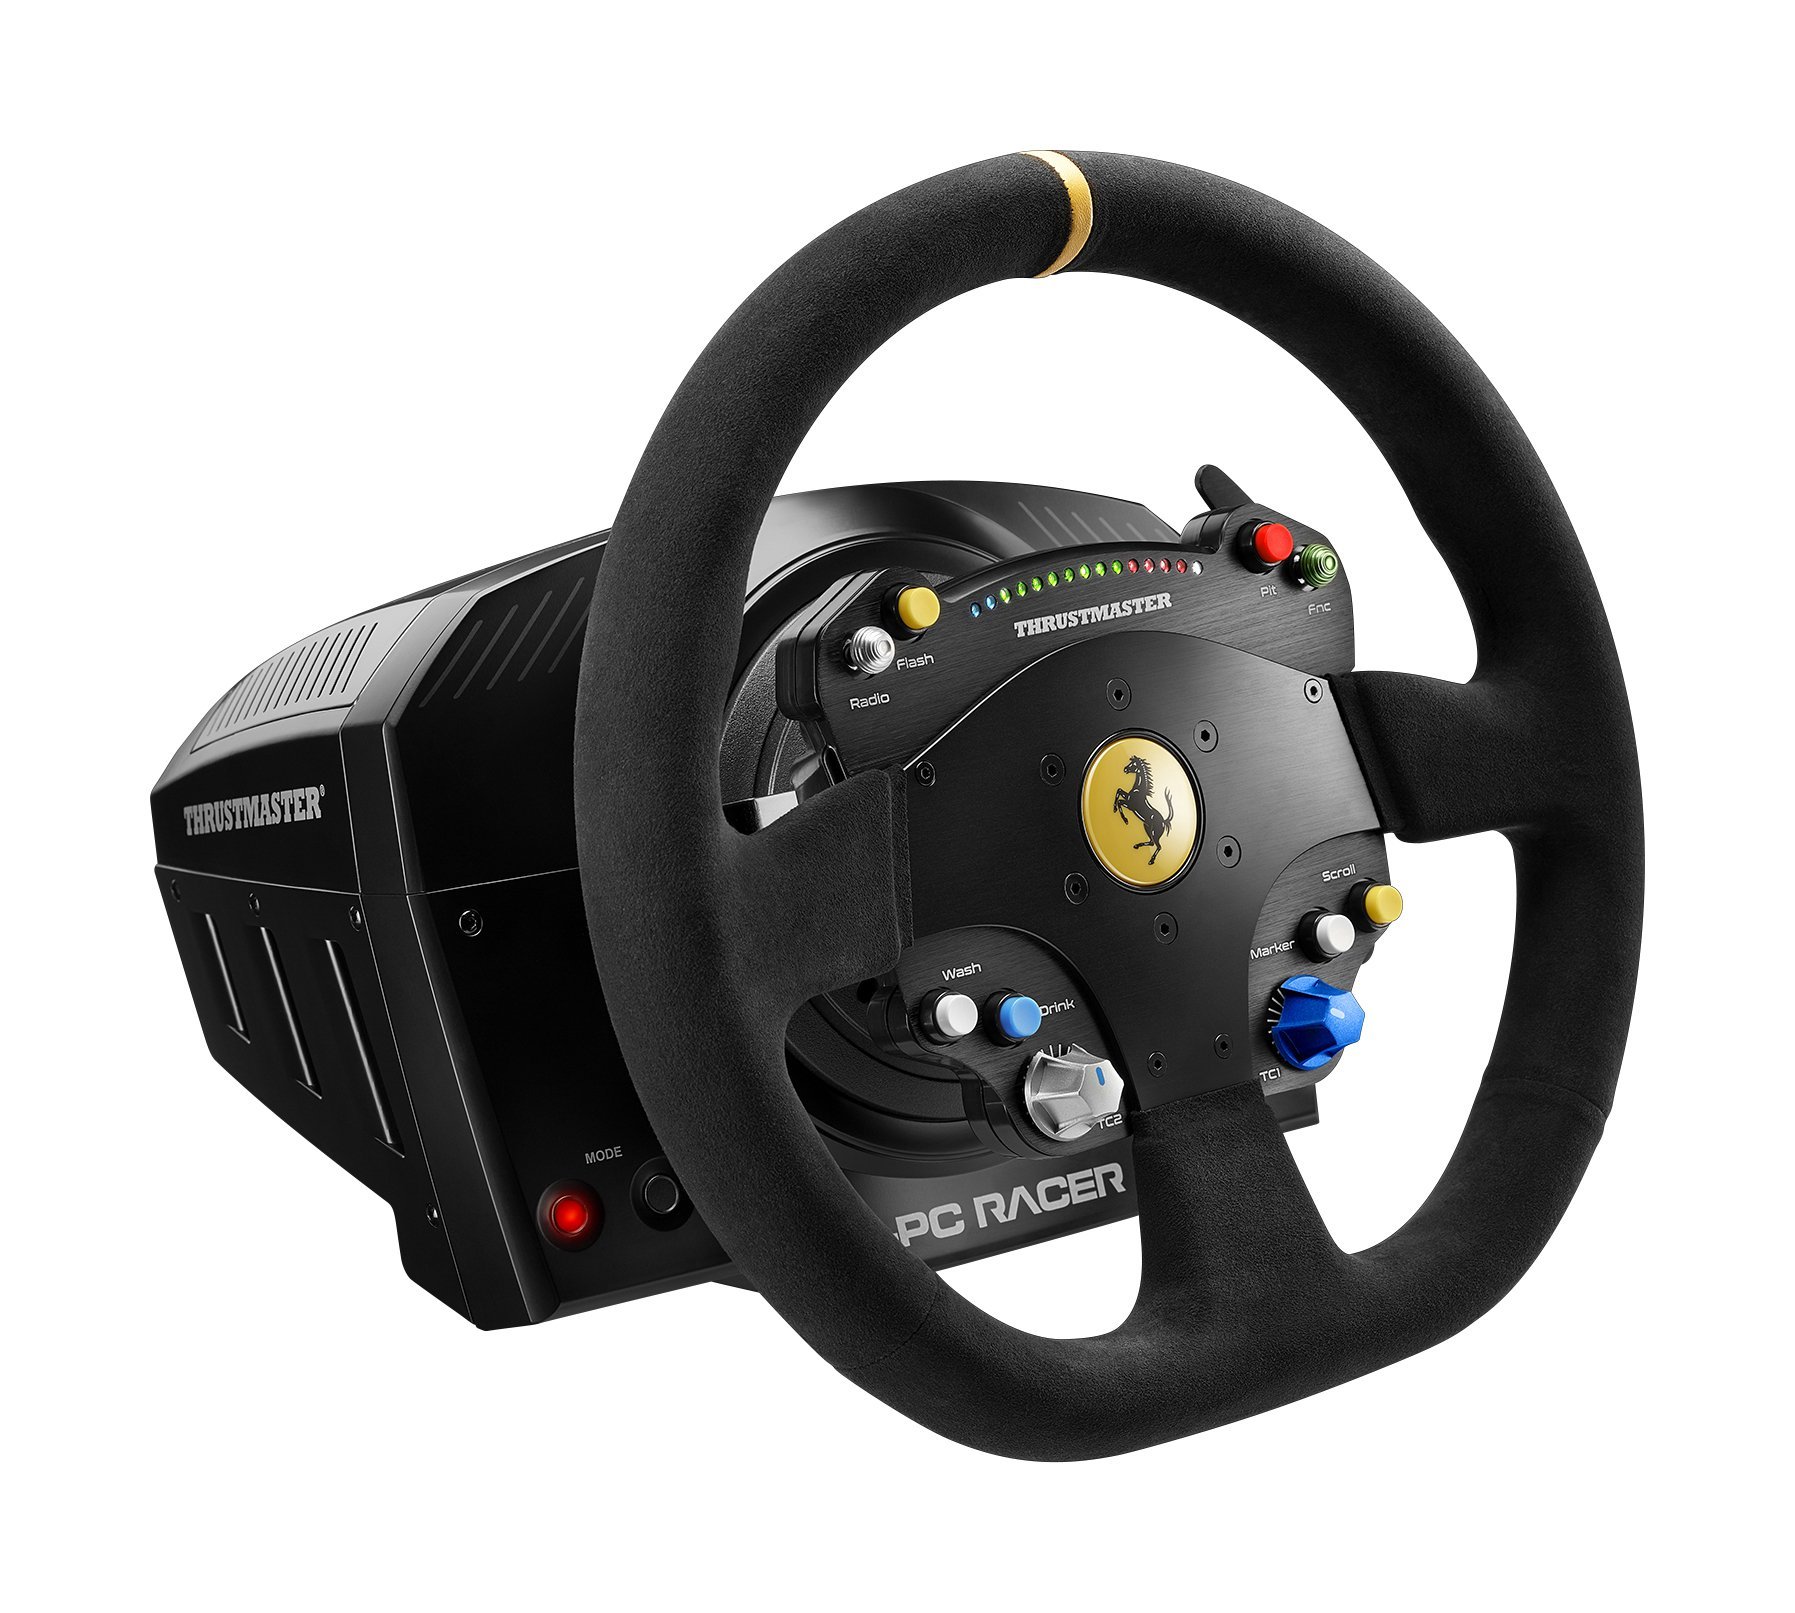 More information about "Thrustmaster annuncia il nuovo TS-PC RACER Ferrari 488 Challenge Edition"